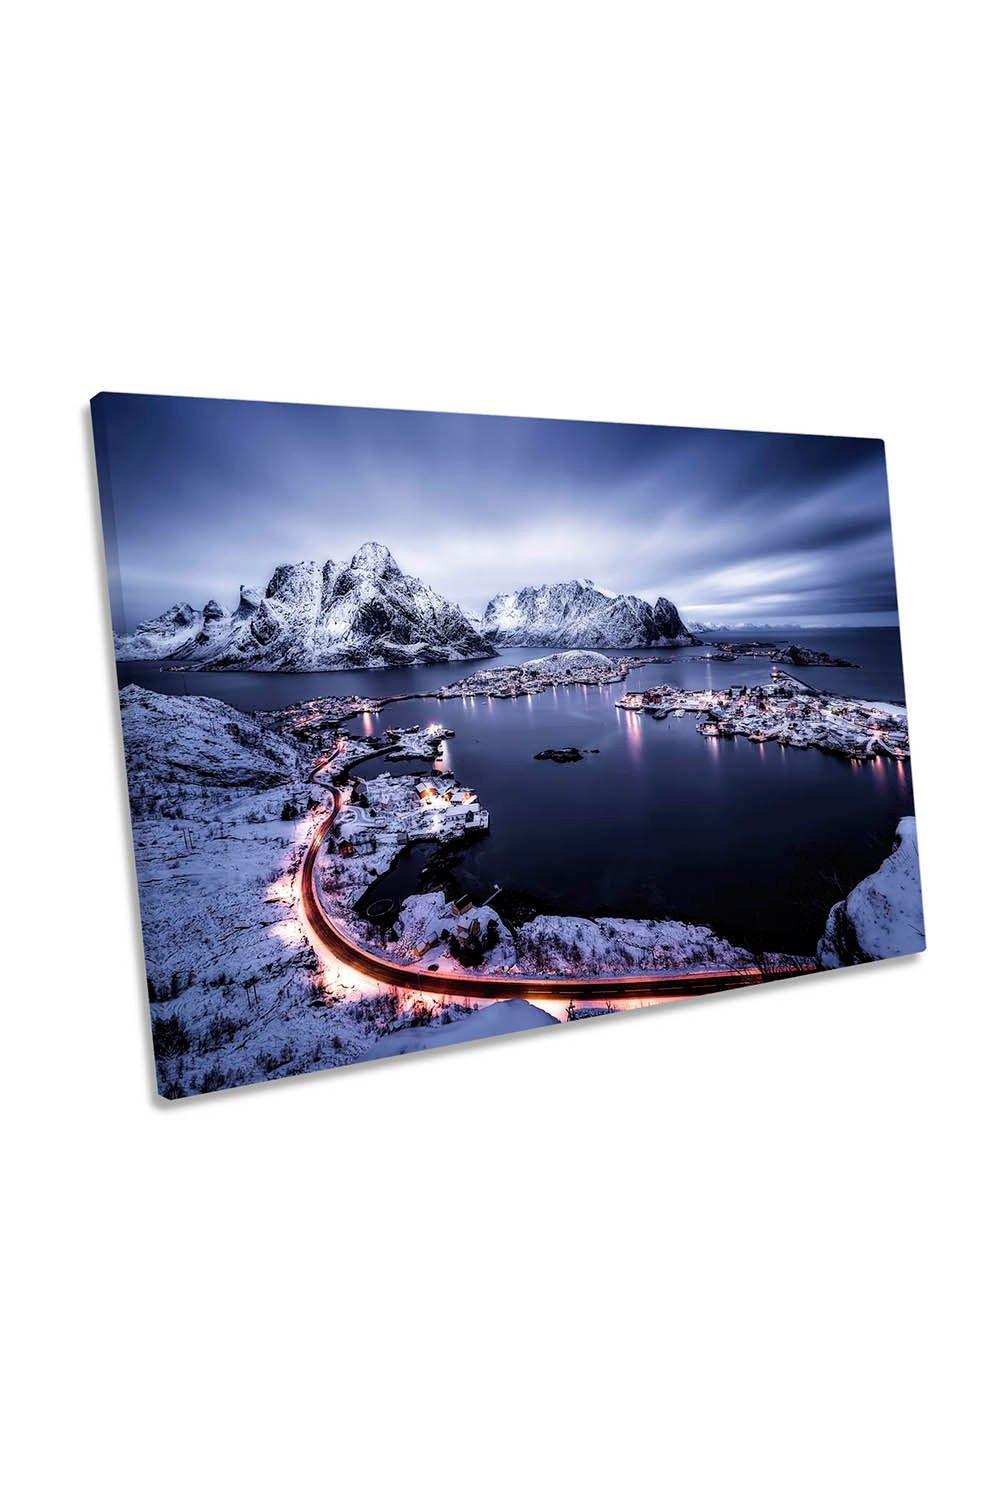 Reine Blue Hour Norway Mountain Canvas Wall Art Picture Print